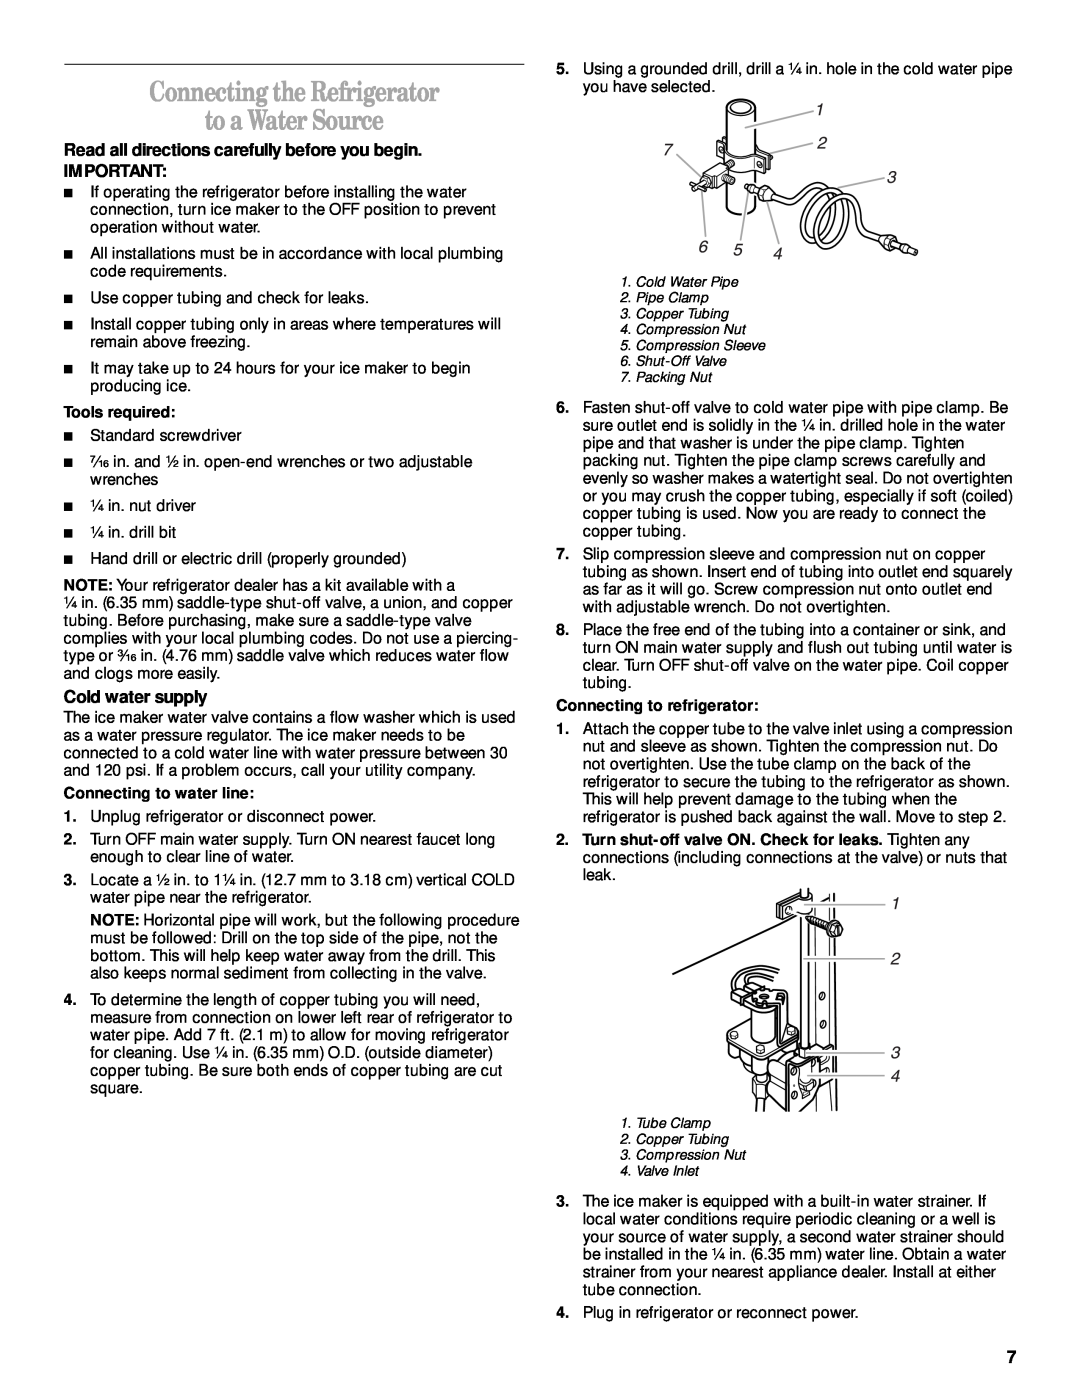 Whirlpool ED25VFXHW02 manual Connecting the Refrigerator to a Water Source, Read all directions carefully before you begin 